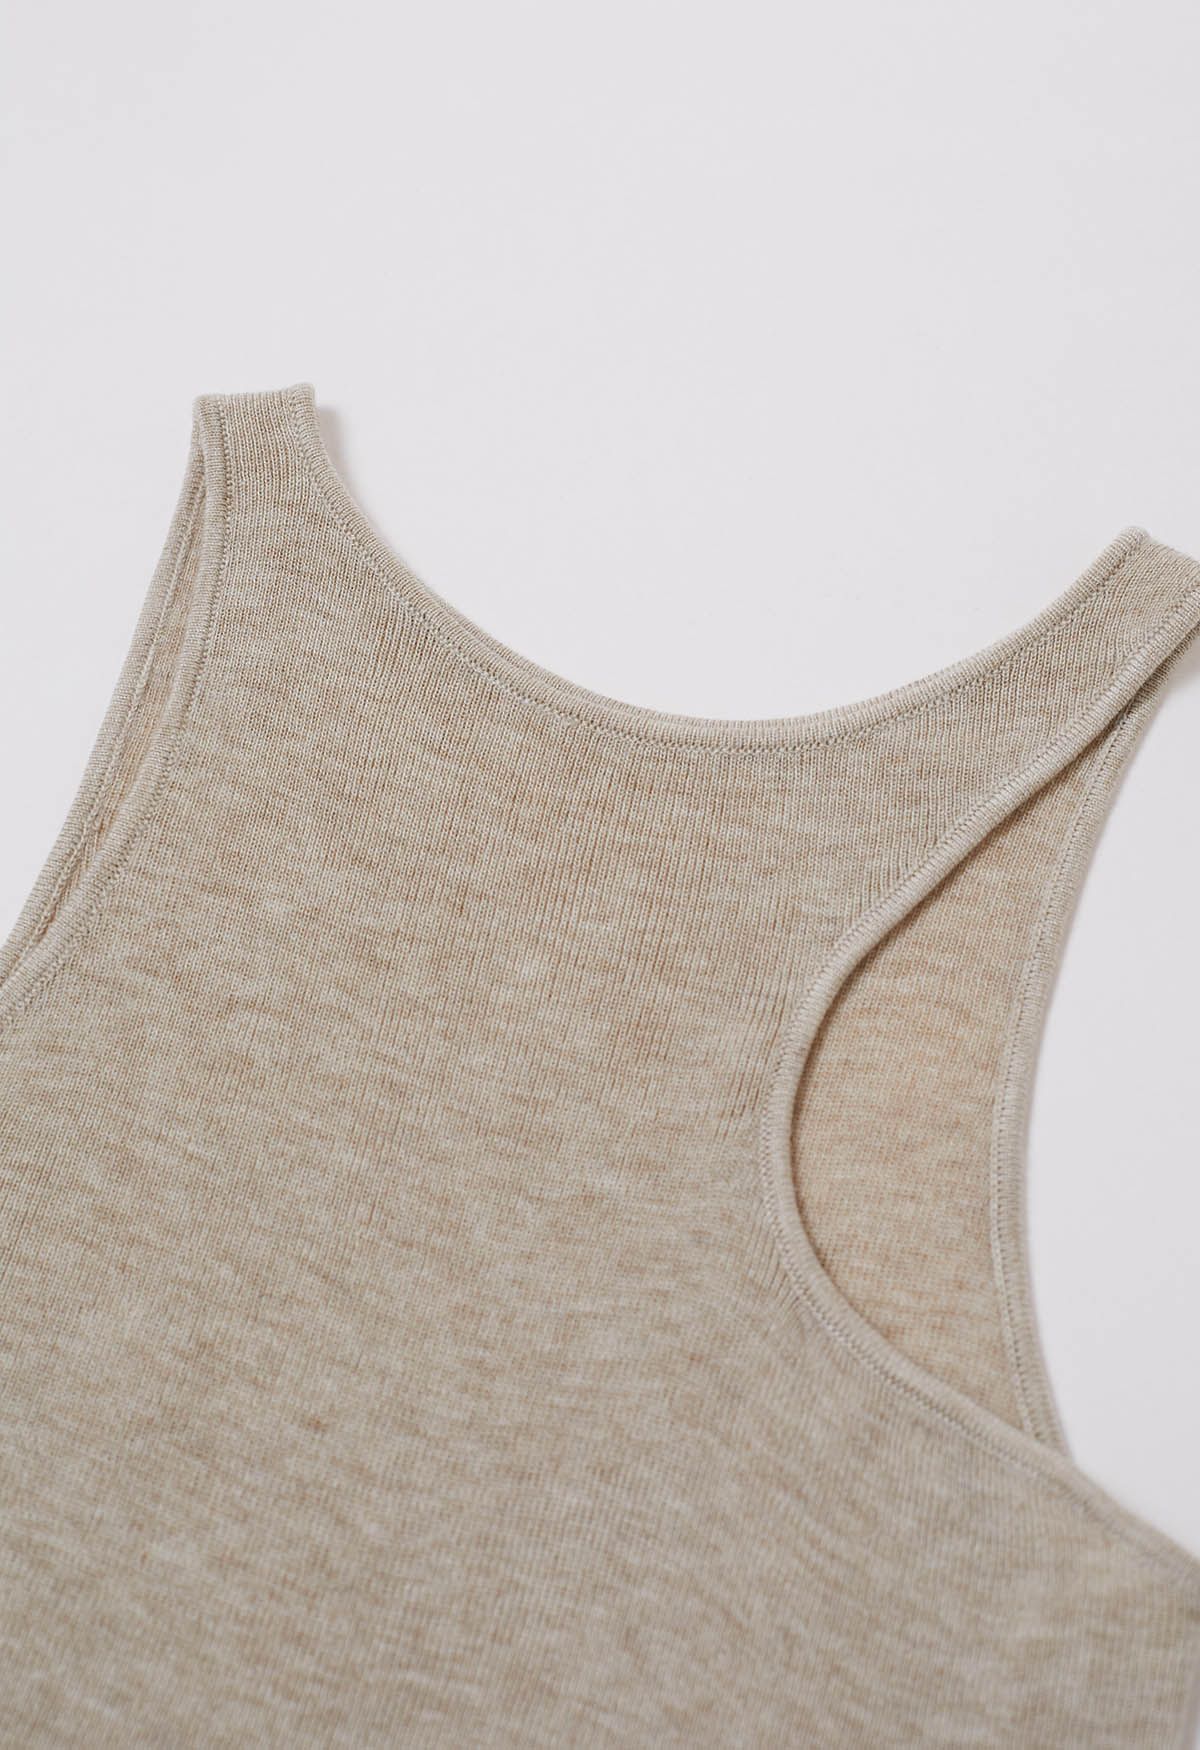 Chic Impression Knit Tank Top in Oatmeal - Retro, Indie and Unique Fashion